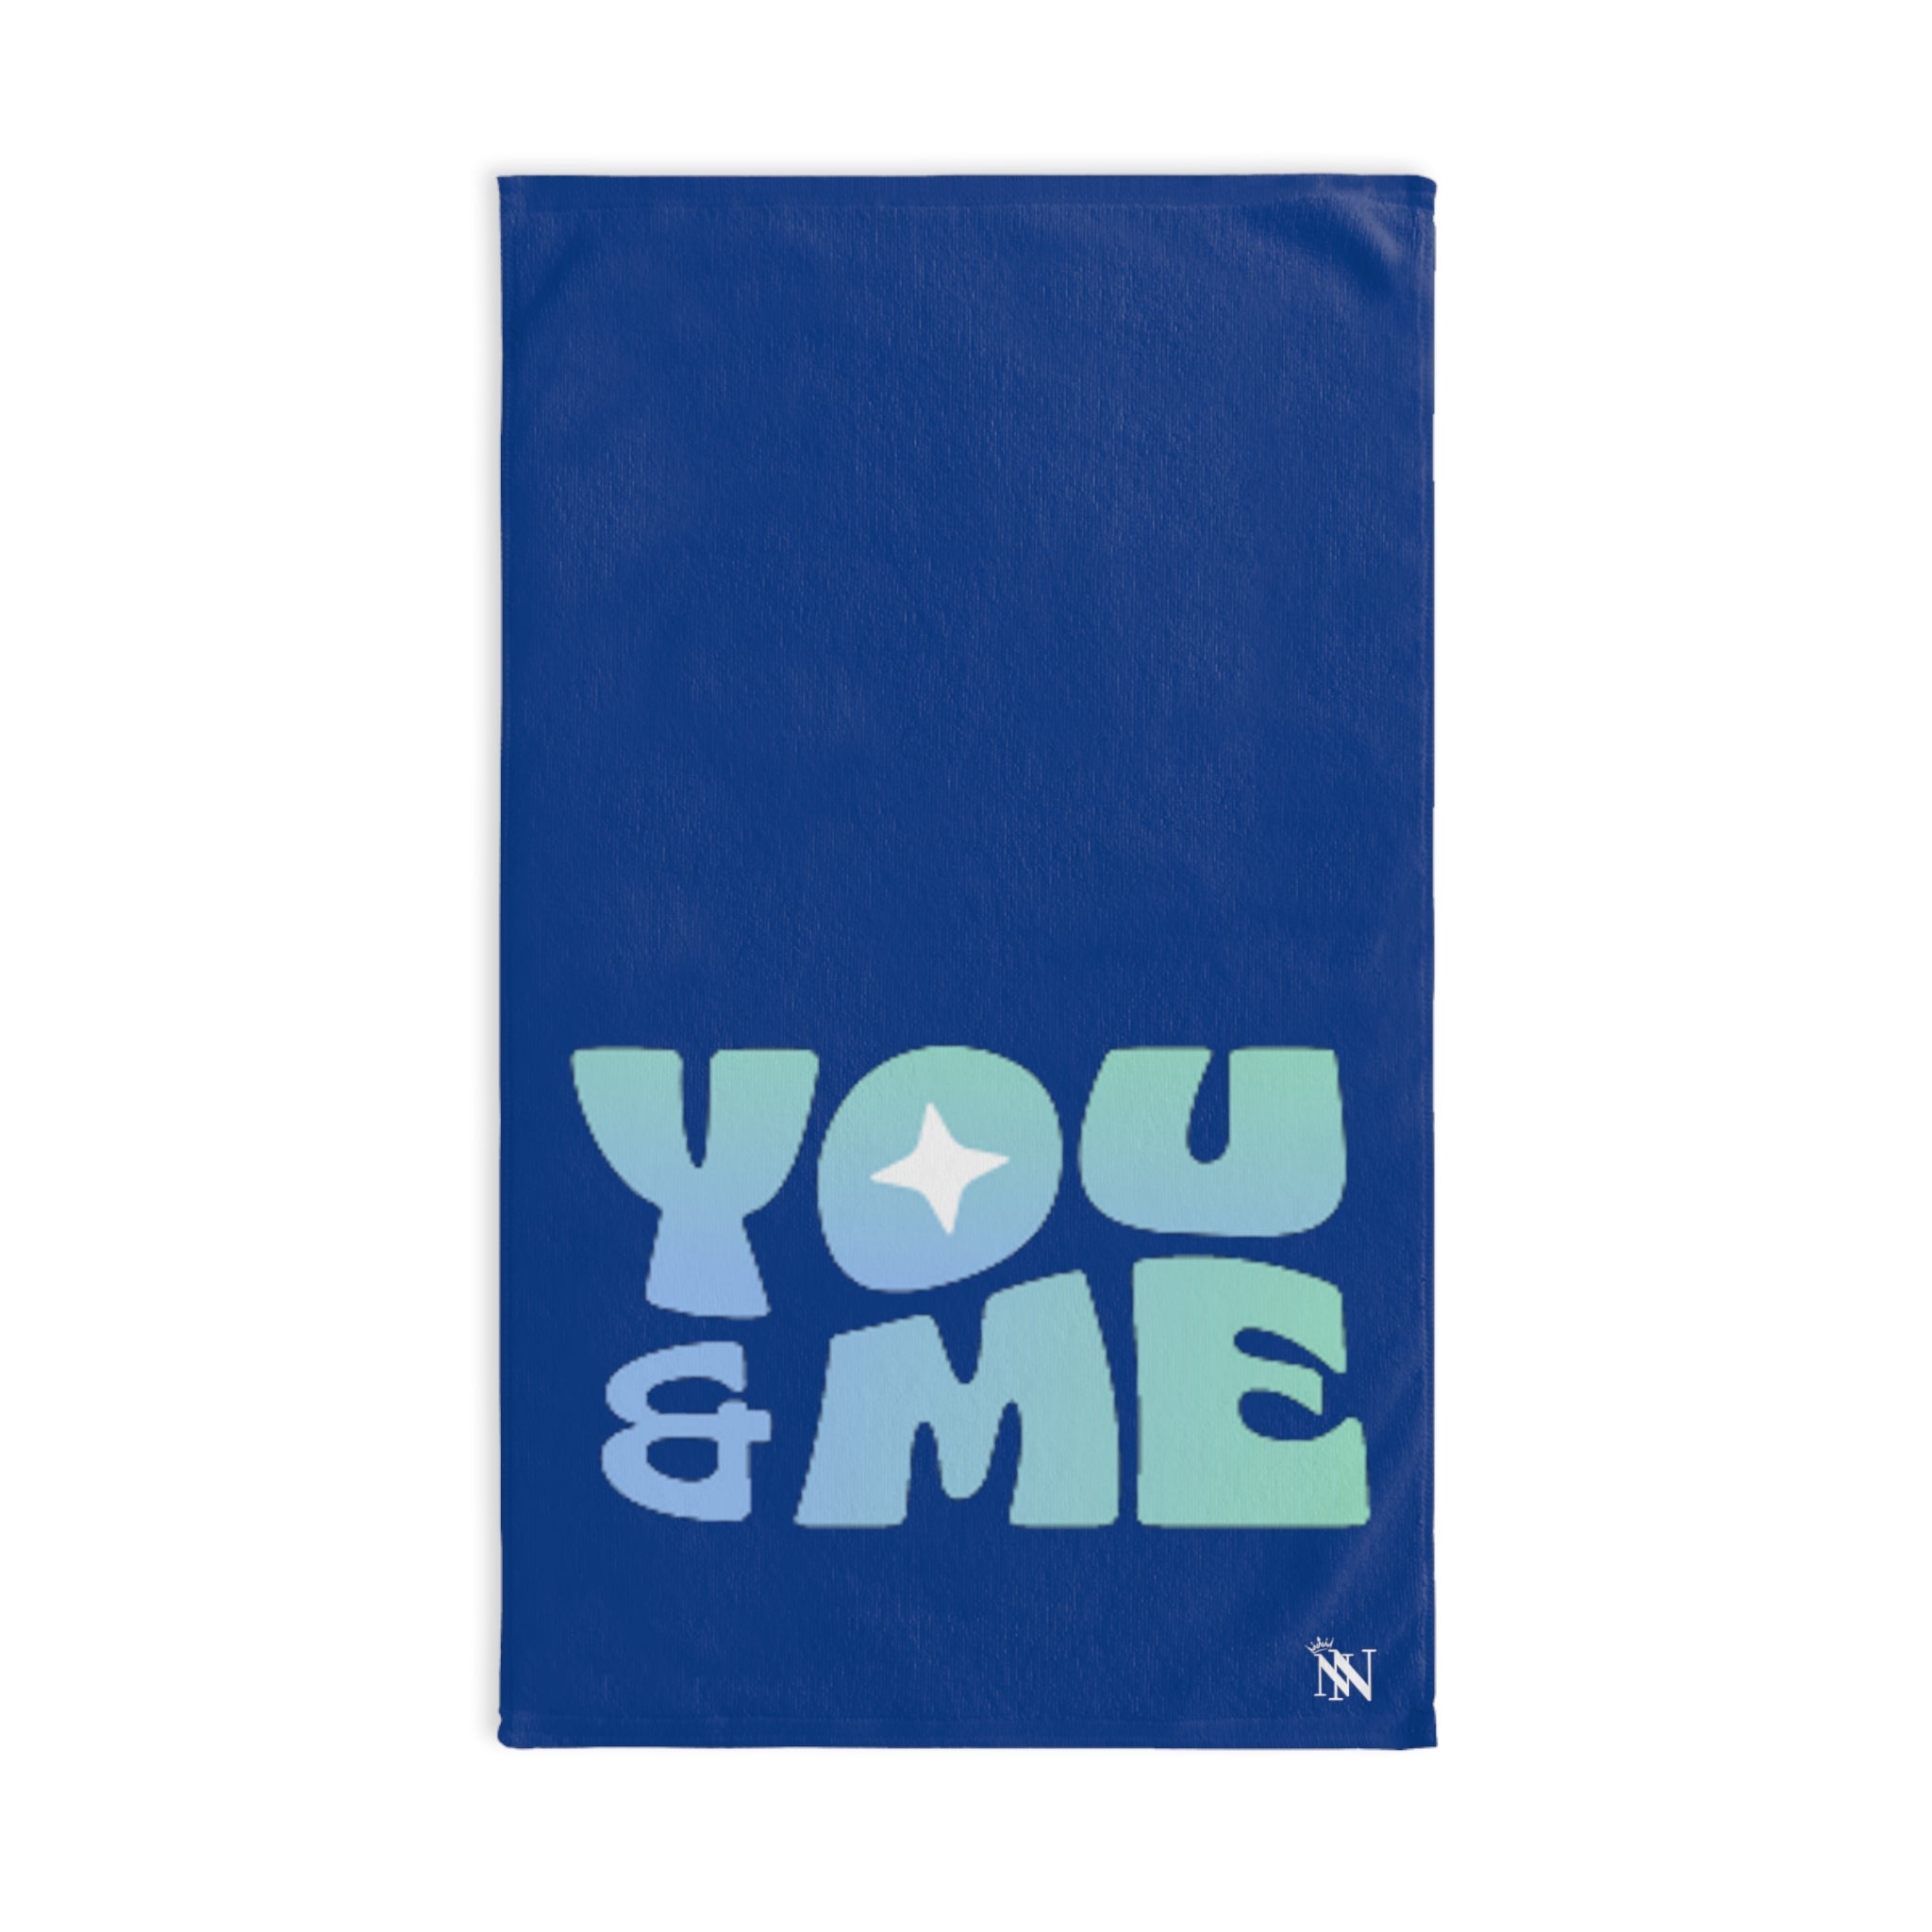 You Me Together Blue | Gifts for Boyfriend, Funny Towel Romantic Gift for Wedding Couple Fiance First Year Anniversary Valentines, Party Gag Gifts, Joke Humor Cloth for Husband Men BF NECTAR NAPKINS